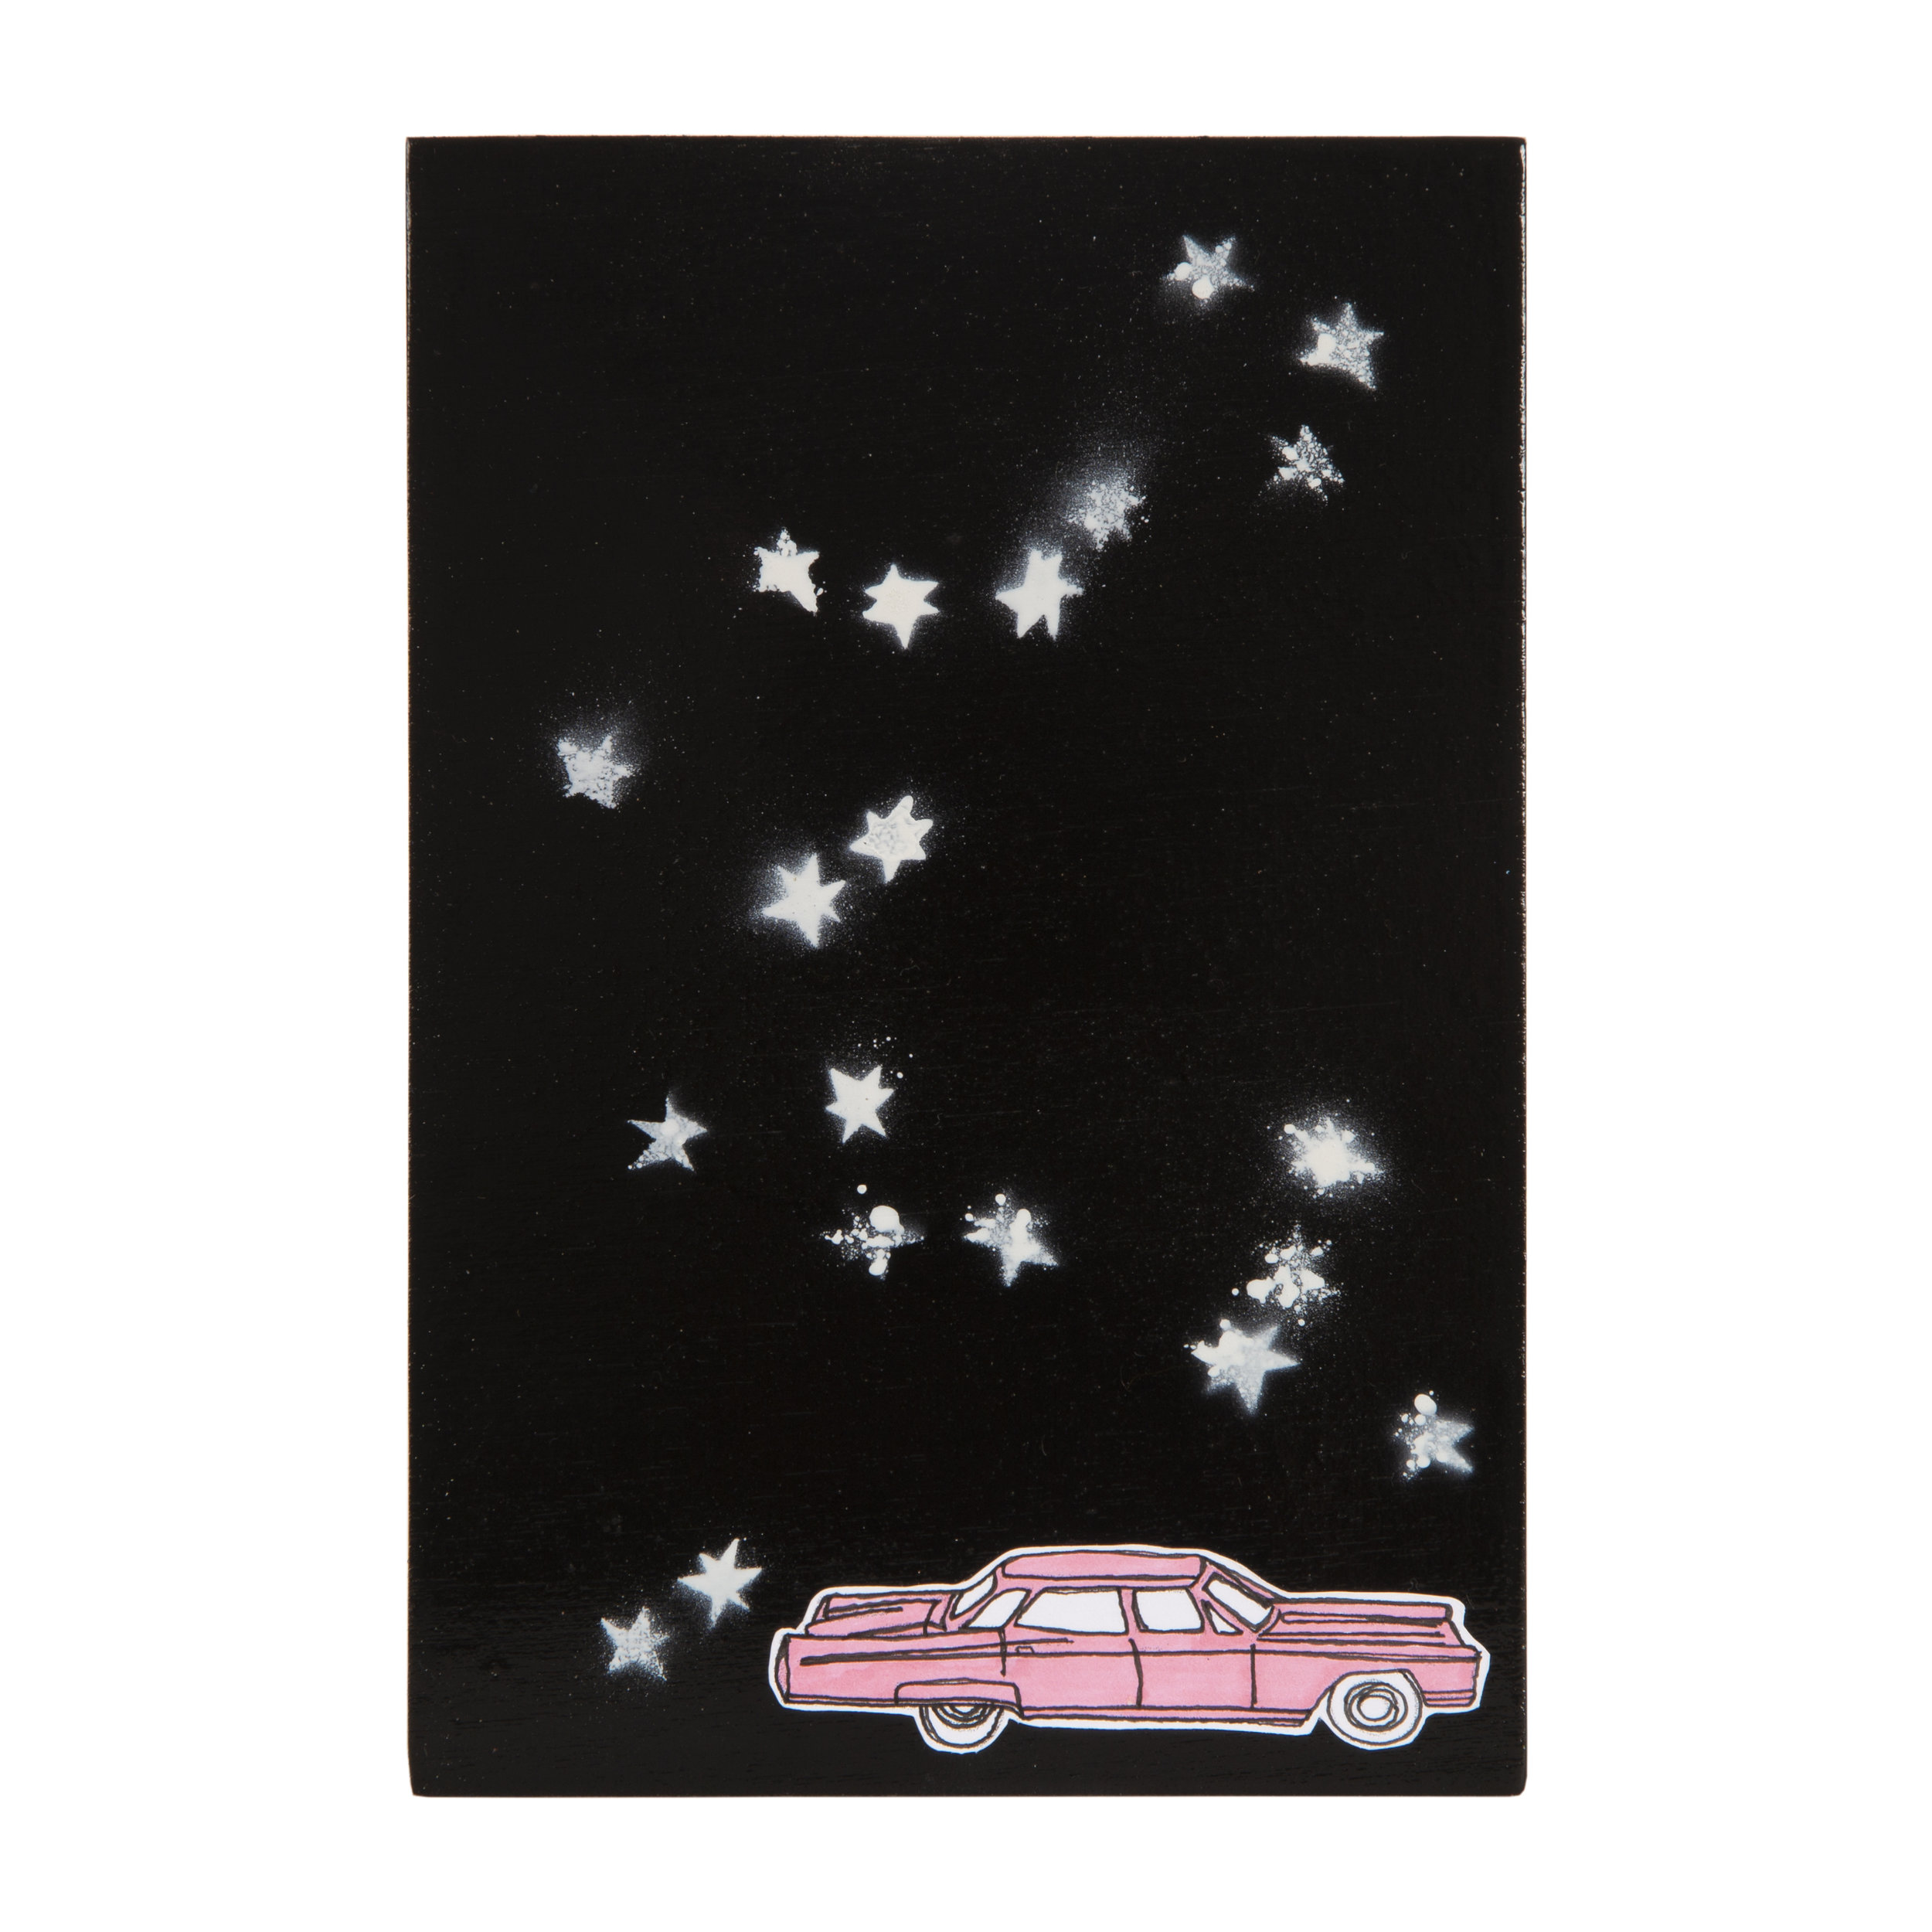   Extra Small Pink Cadillac Dream   Mixed media on panel, 4” x 6”, 2019. Not For Sale.  